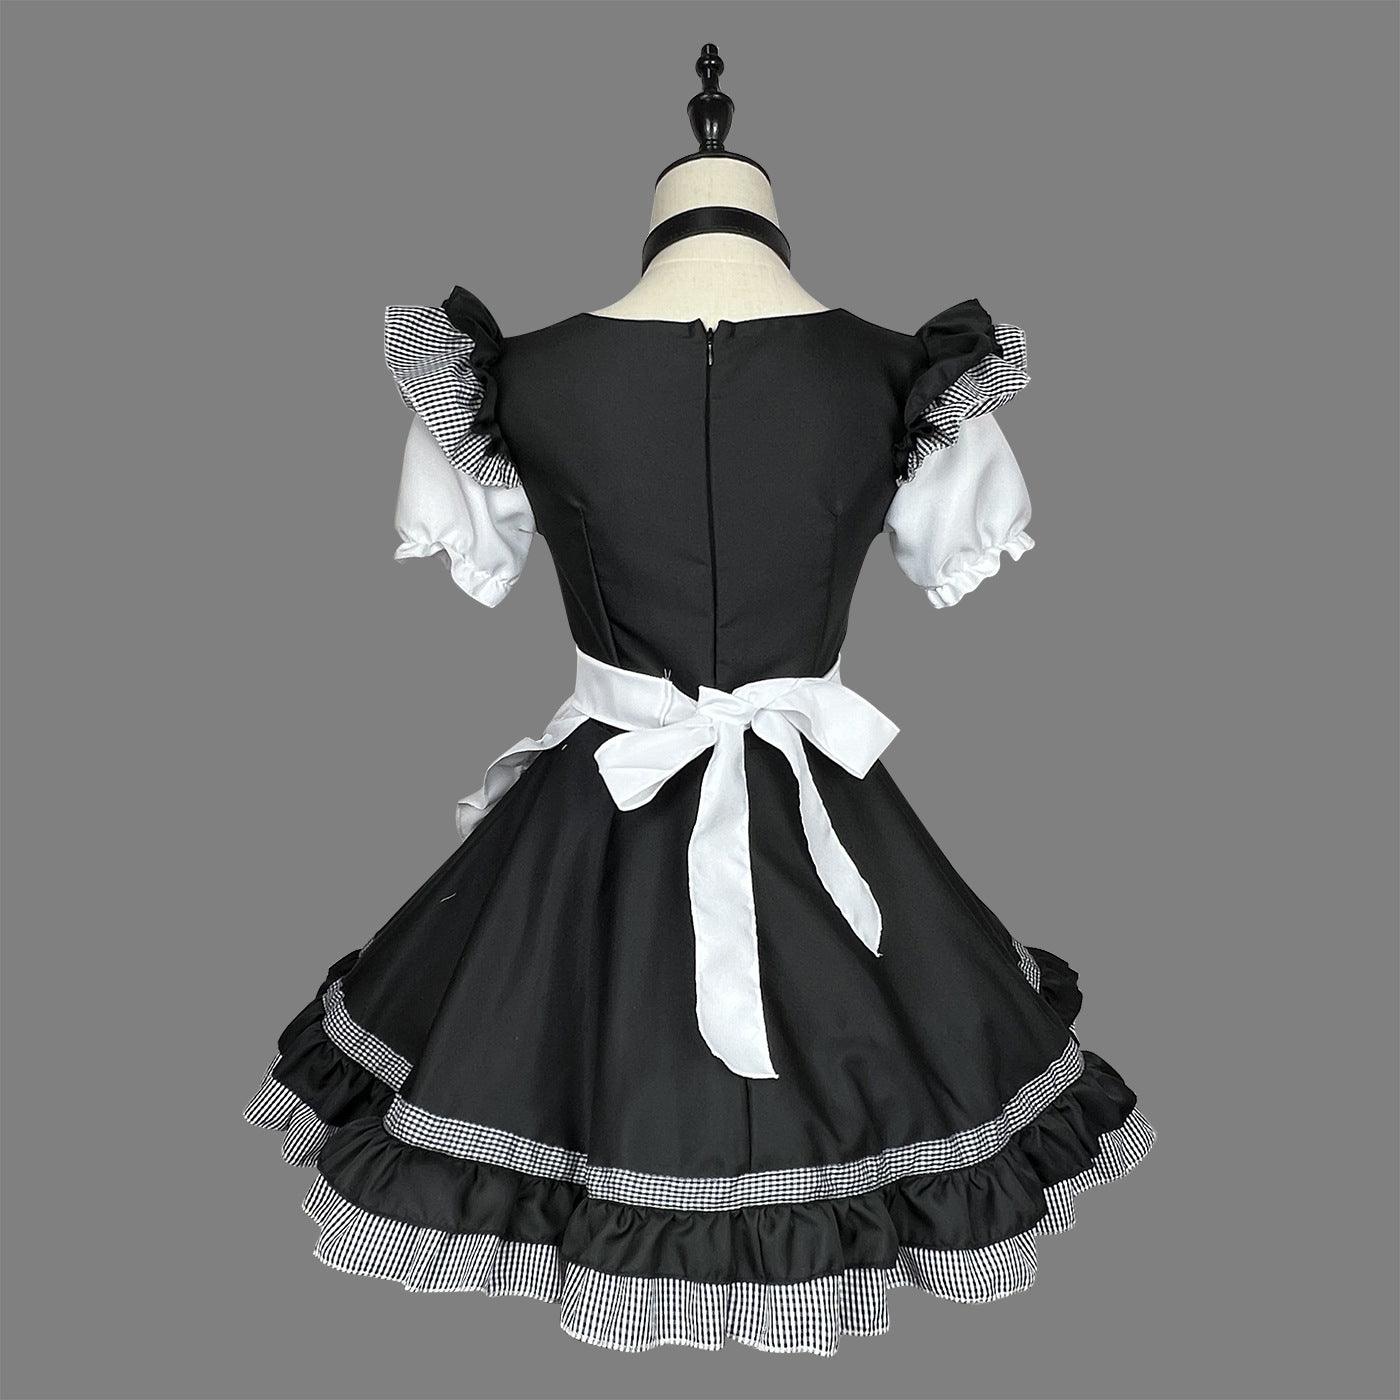 Japanese Black and White Classic Catgirl Maid Outfit Plus Size Lolita Fancy Dress Cosplay